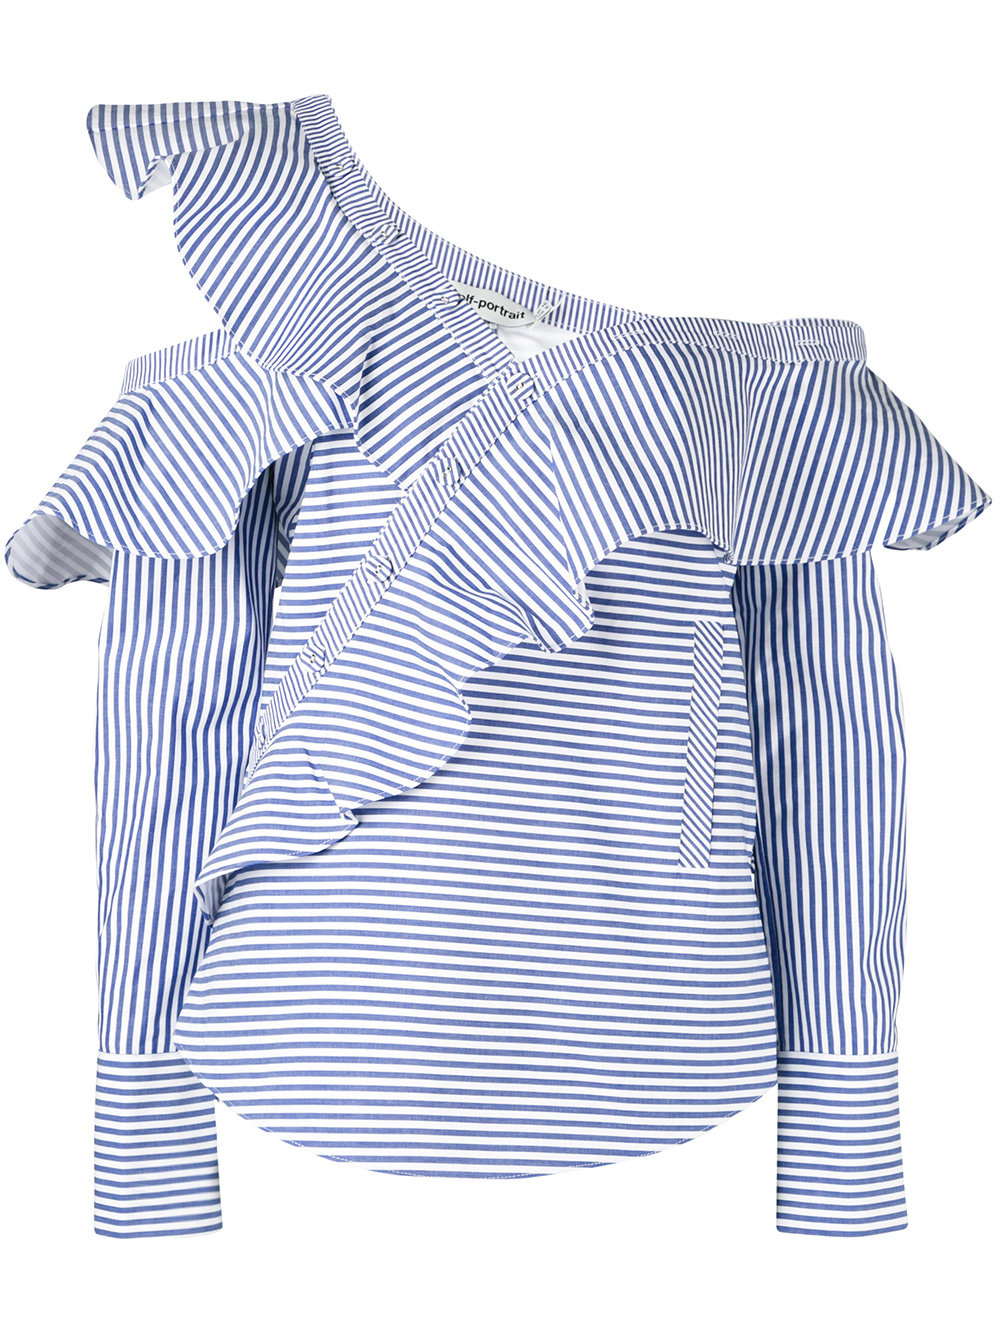 Self-Portrait - Striped Frill Blouse | ABOUT ICONS